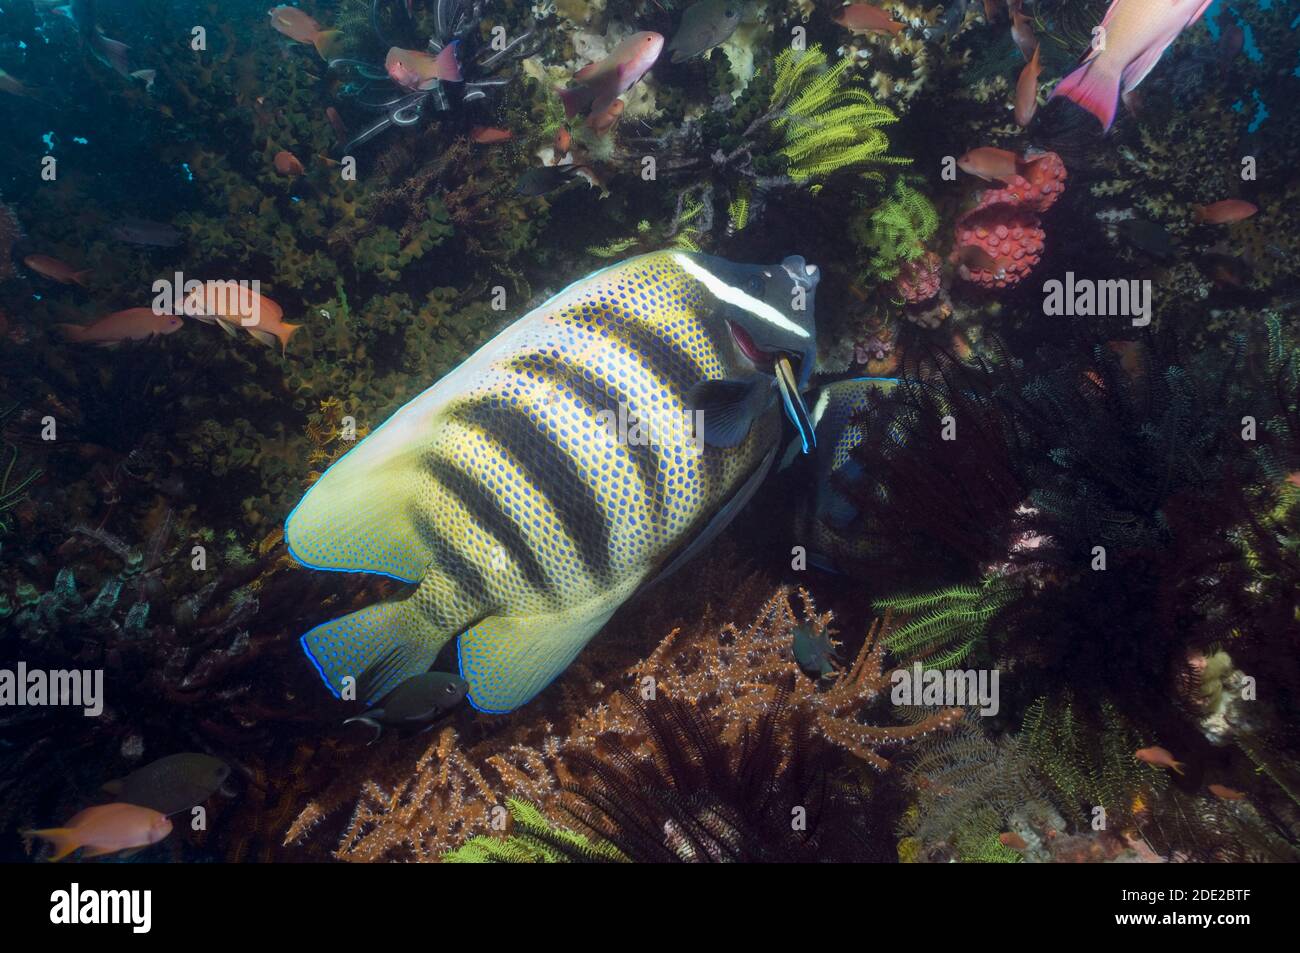 Six-banded angelfish (Pomacanthus sexstriatus) being cleaned by a Bluestreak cleaner wrasse (Labroides dimidiatus).  Indonesia. Stock Photo